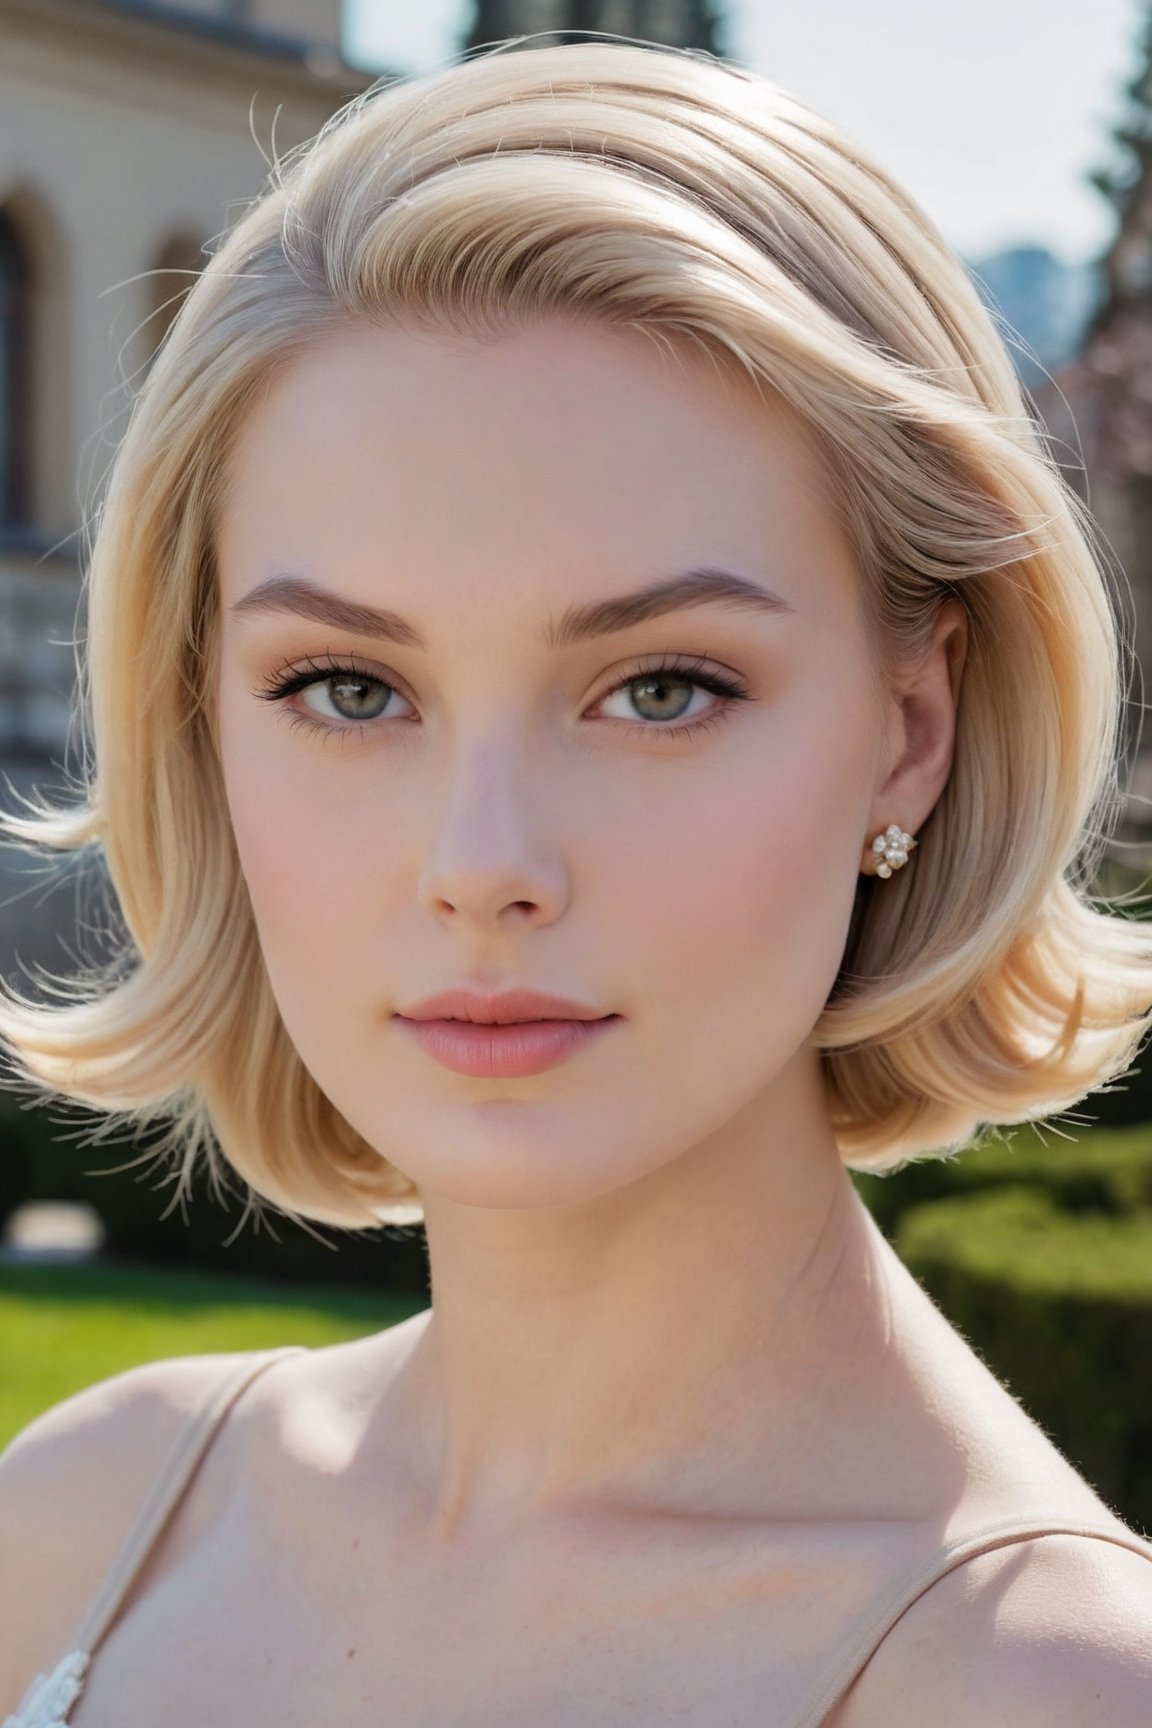 headshot,Nudity,Naked,Nude,No Clothes,Ash-blonde hair,face similar to Grace Kelly,Russian,pale skin,Side-swept bob Hairstyle,Matte skin makeup,21 year old,Boyish_normal_breasts,headshot,Sunny Day Spring,Posing for a photo

